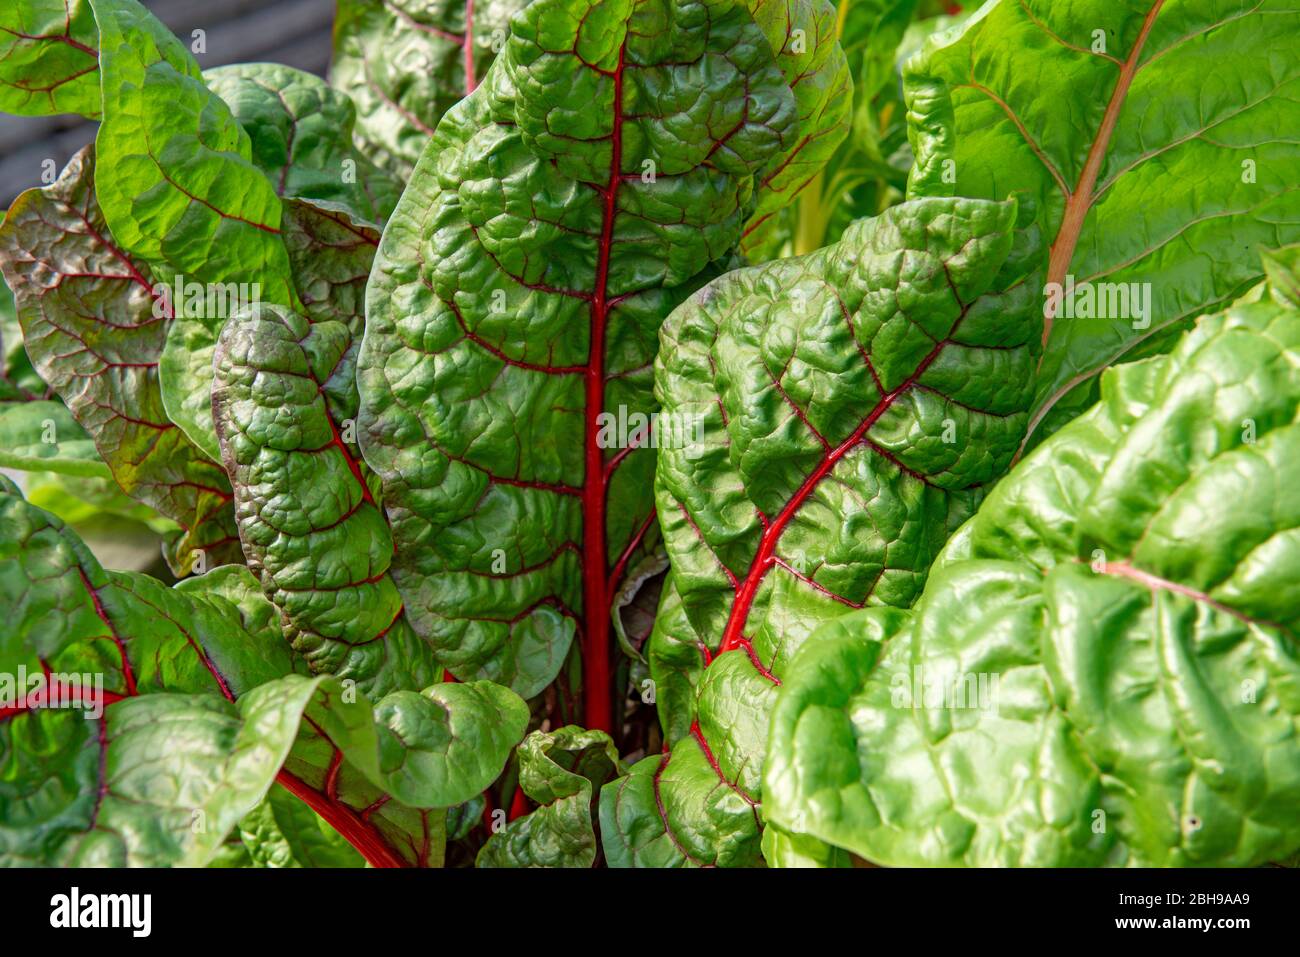 Swiss chard, Beta vulgaris, family Foxtail Family, Amaranthaceae, Central Europe Stock Photo